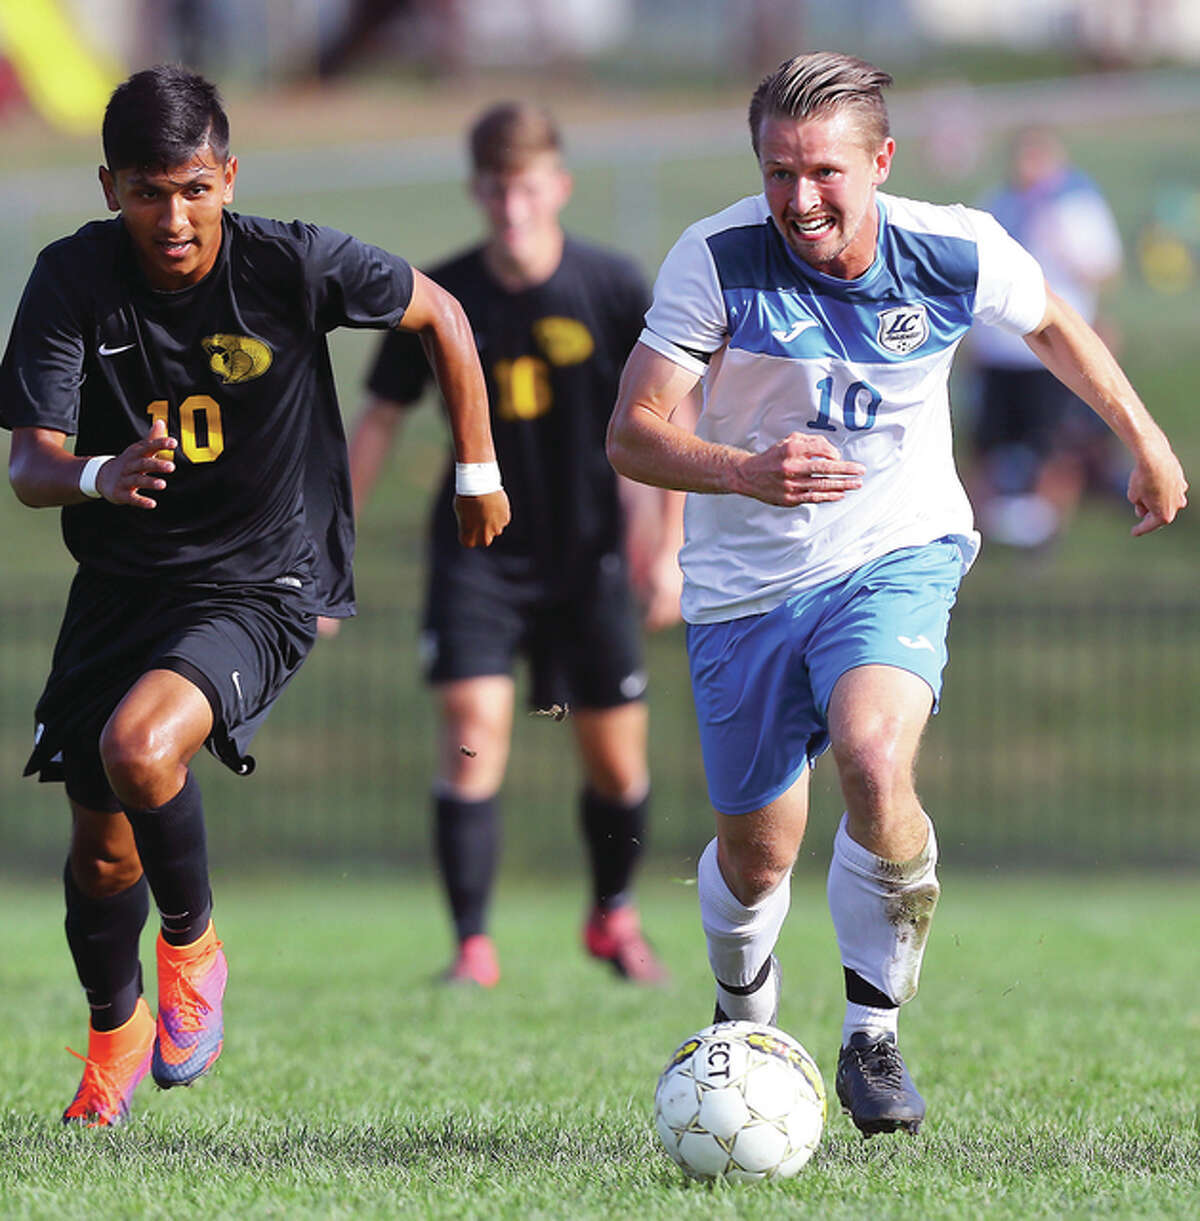 Lewis & Clark’s Lochlan Reus, right, drives the ball upfield as he is trailed by Parkland’s Alex Zarco during Saturday’s match at LCCC’s Soccer Stadium in Godfrey.